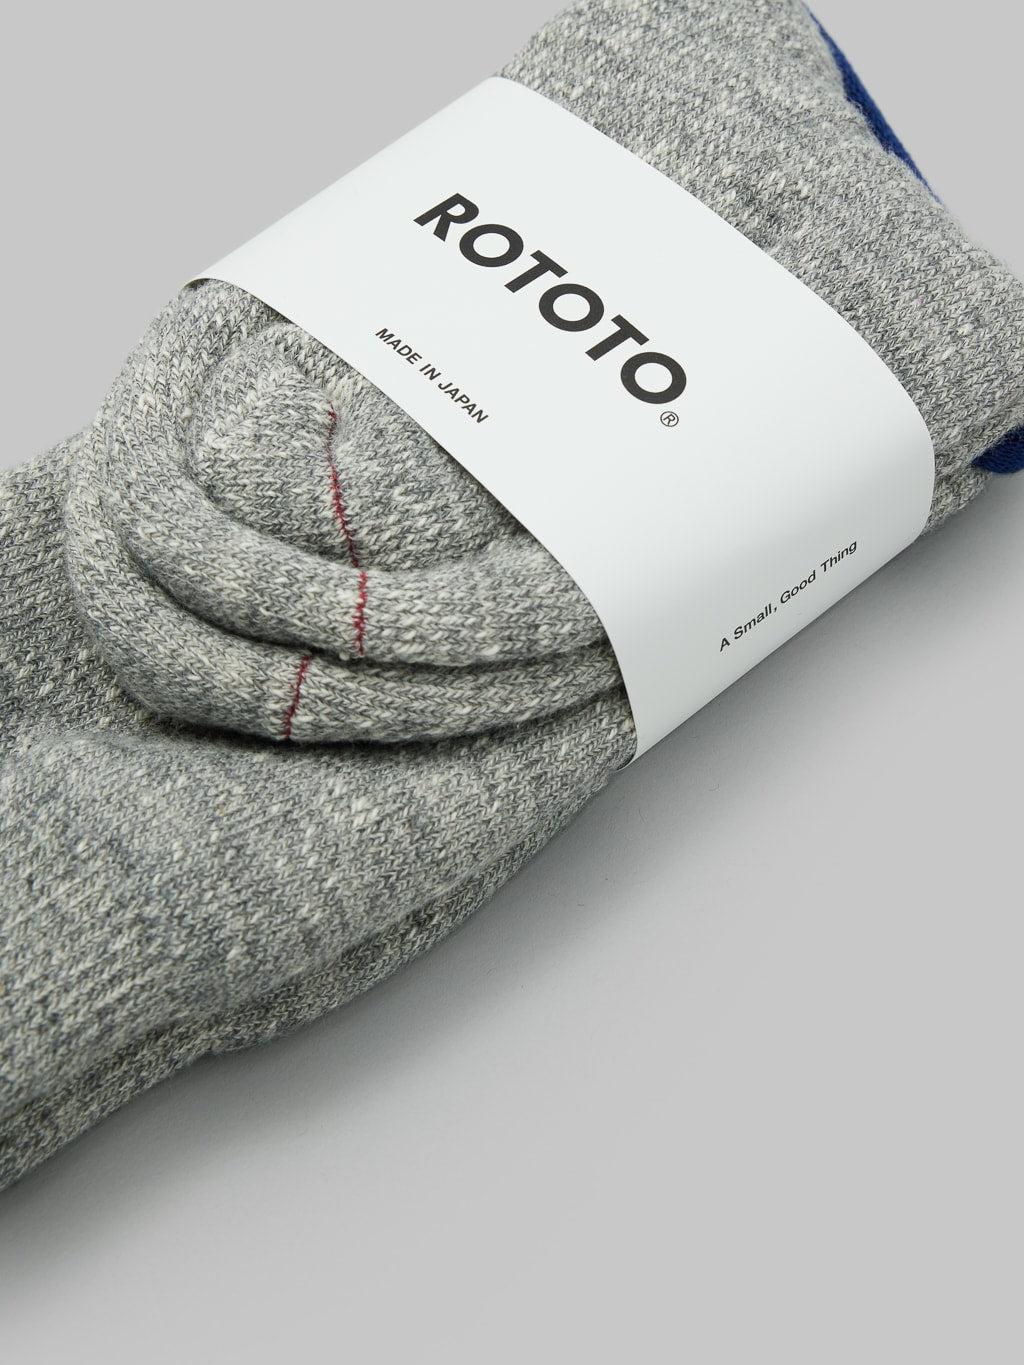 rototo double face crew socks cotton wool gray brand label